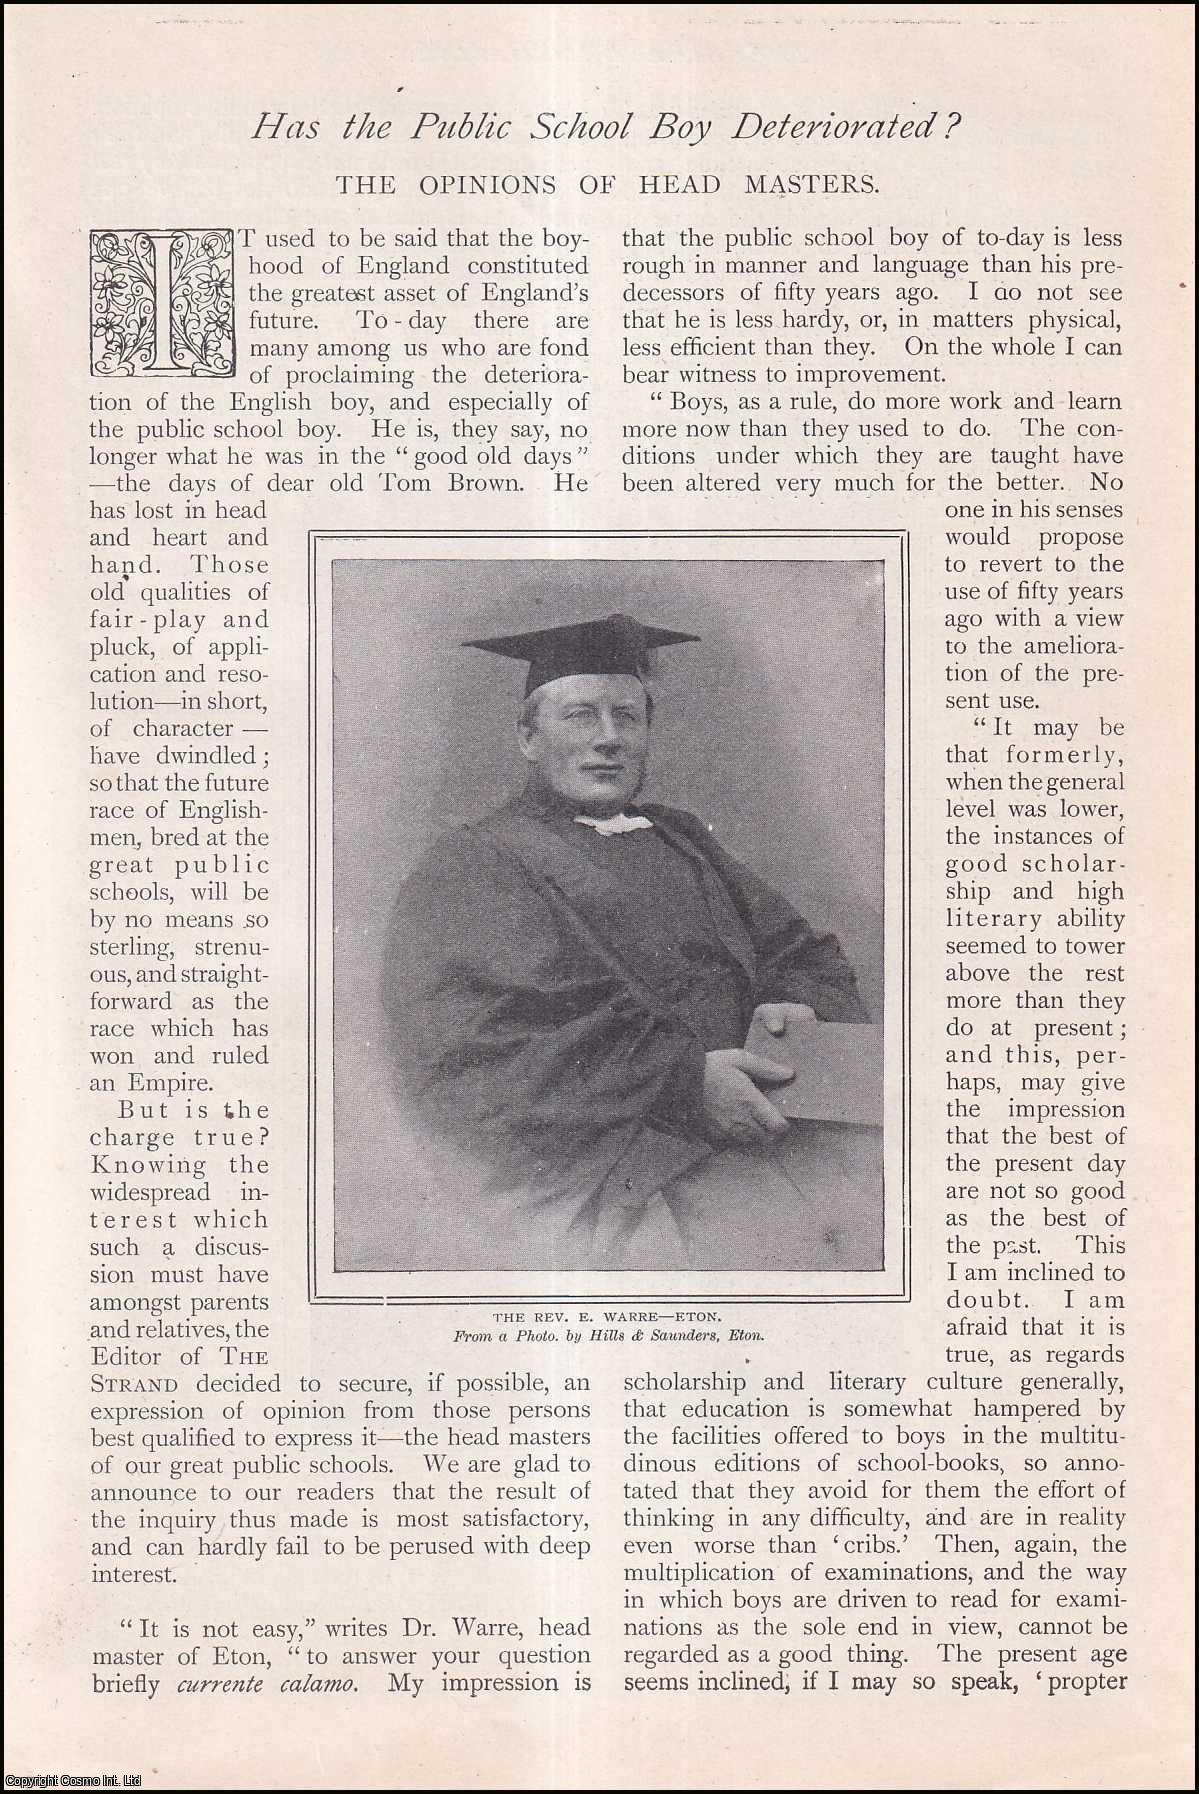 --- - Has the The Public Schoolboy Deteriorated?The Opinions of Head Masters. A rare original article from The Strand Magazine, 1905.